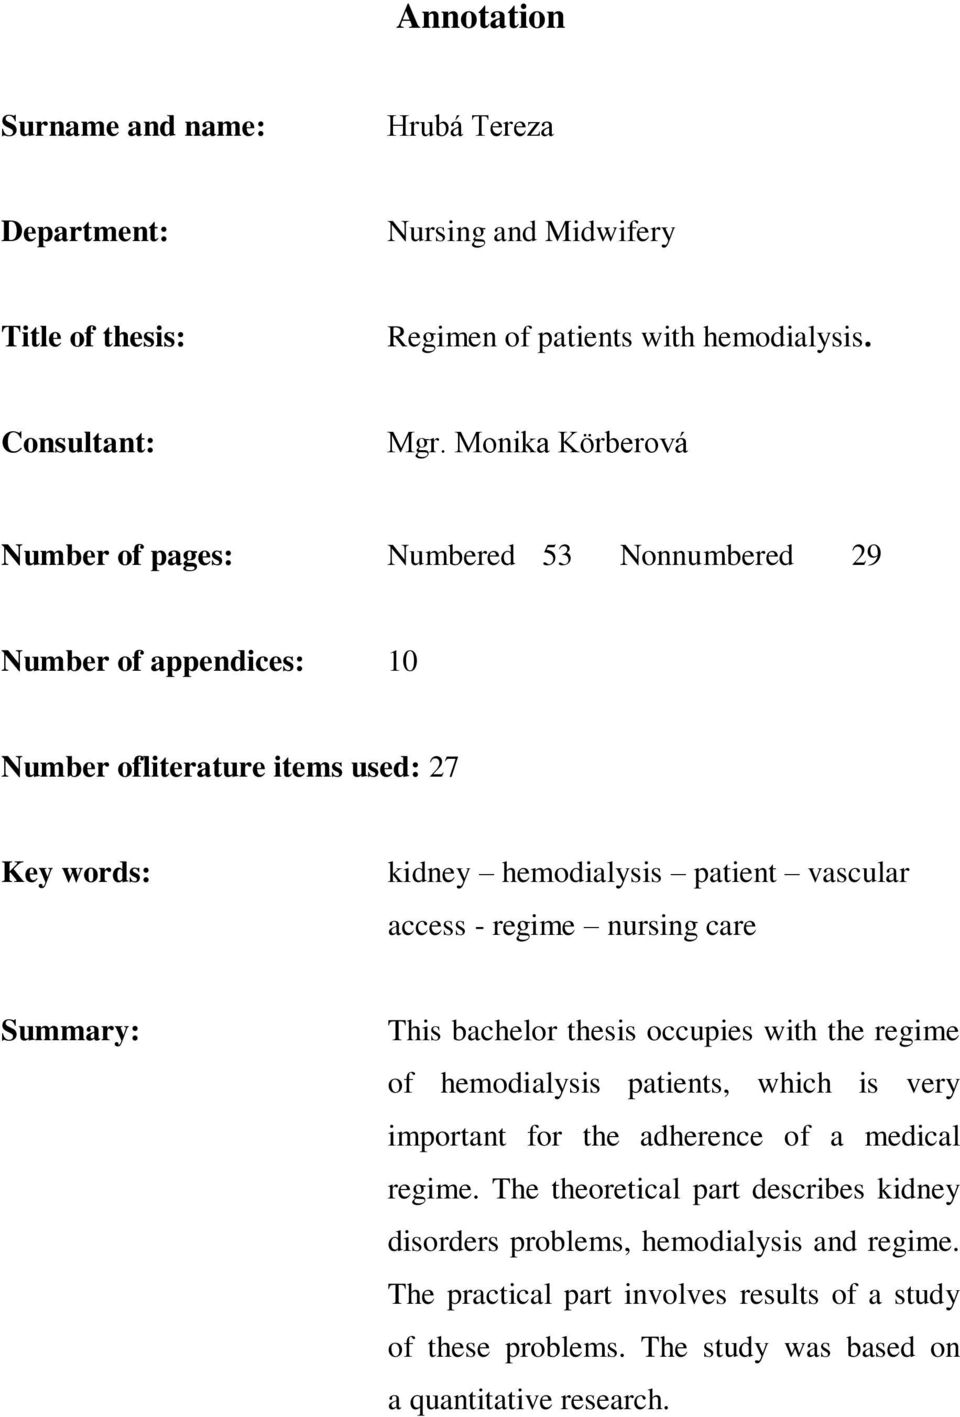 access - regime nursing care Summary: This bachelor thesis occupies with the regime of hemodialysis patients, which is very important for the adherence of a medical regime.